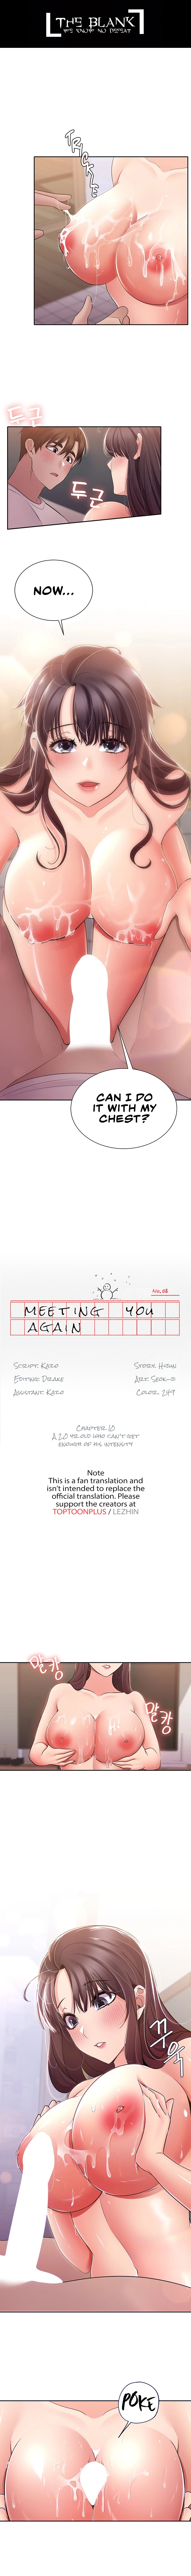 Meeting You Again - Page 1